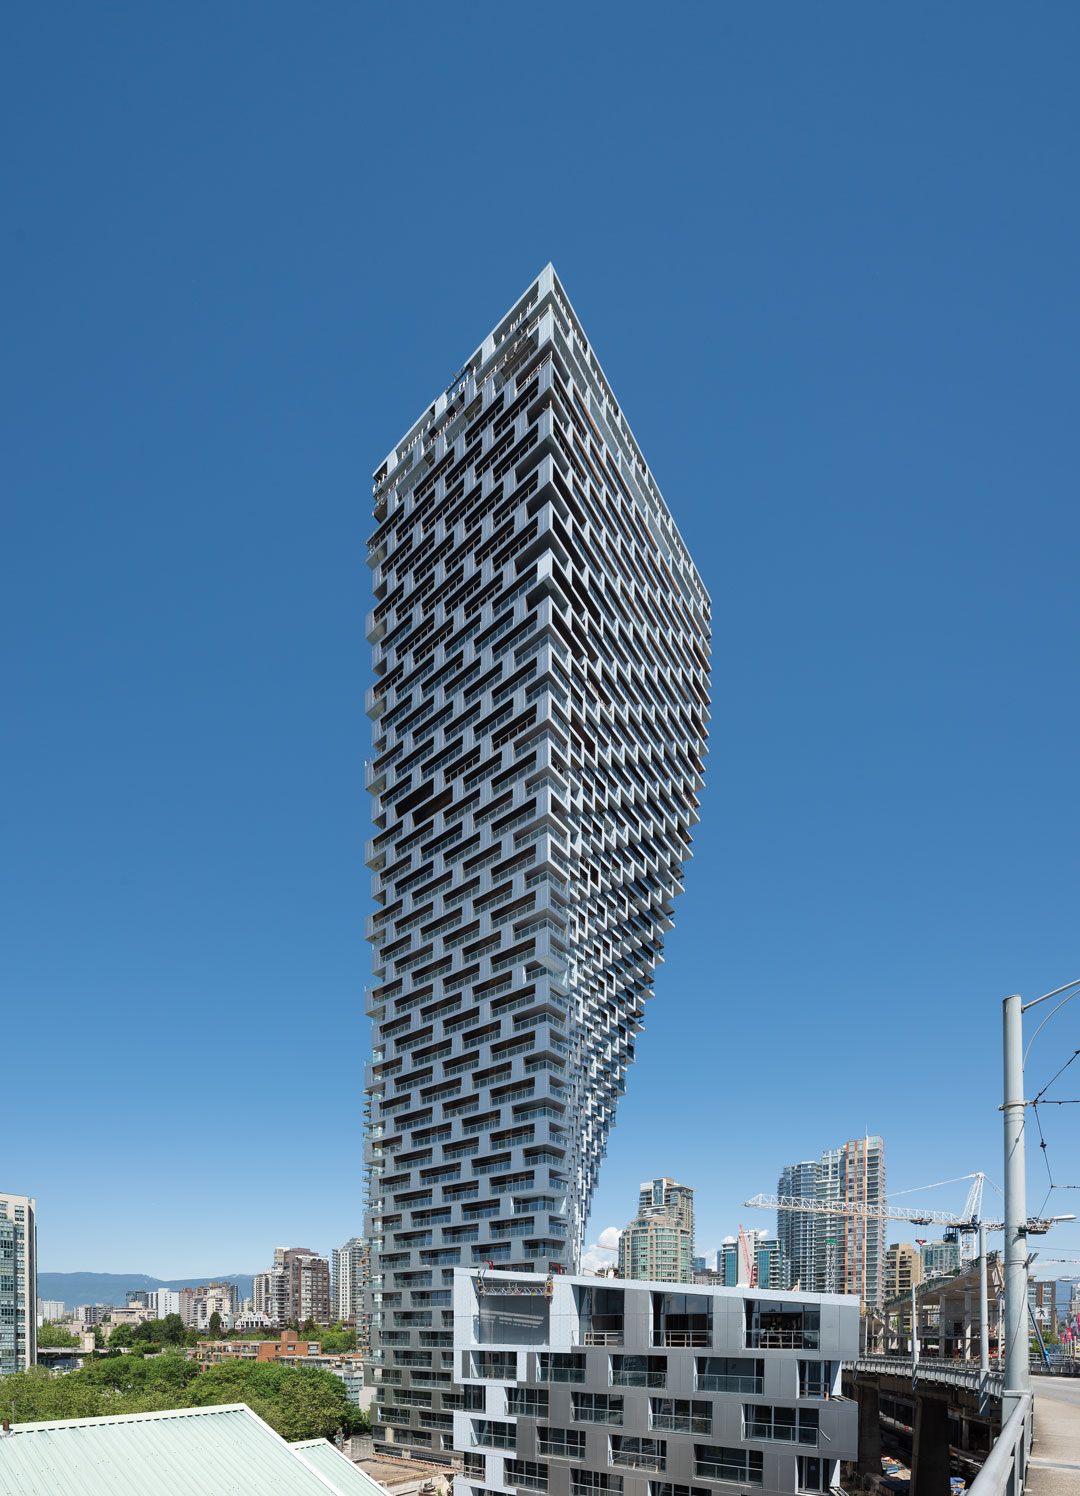 Vancouver House, as featured in our newly updated Wallpaper* City Guide to Vancouver